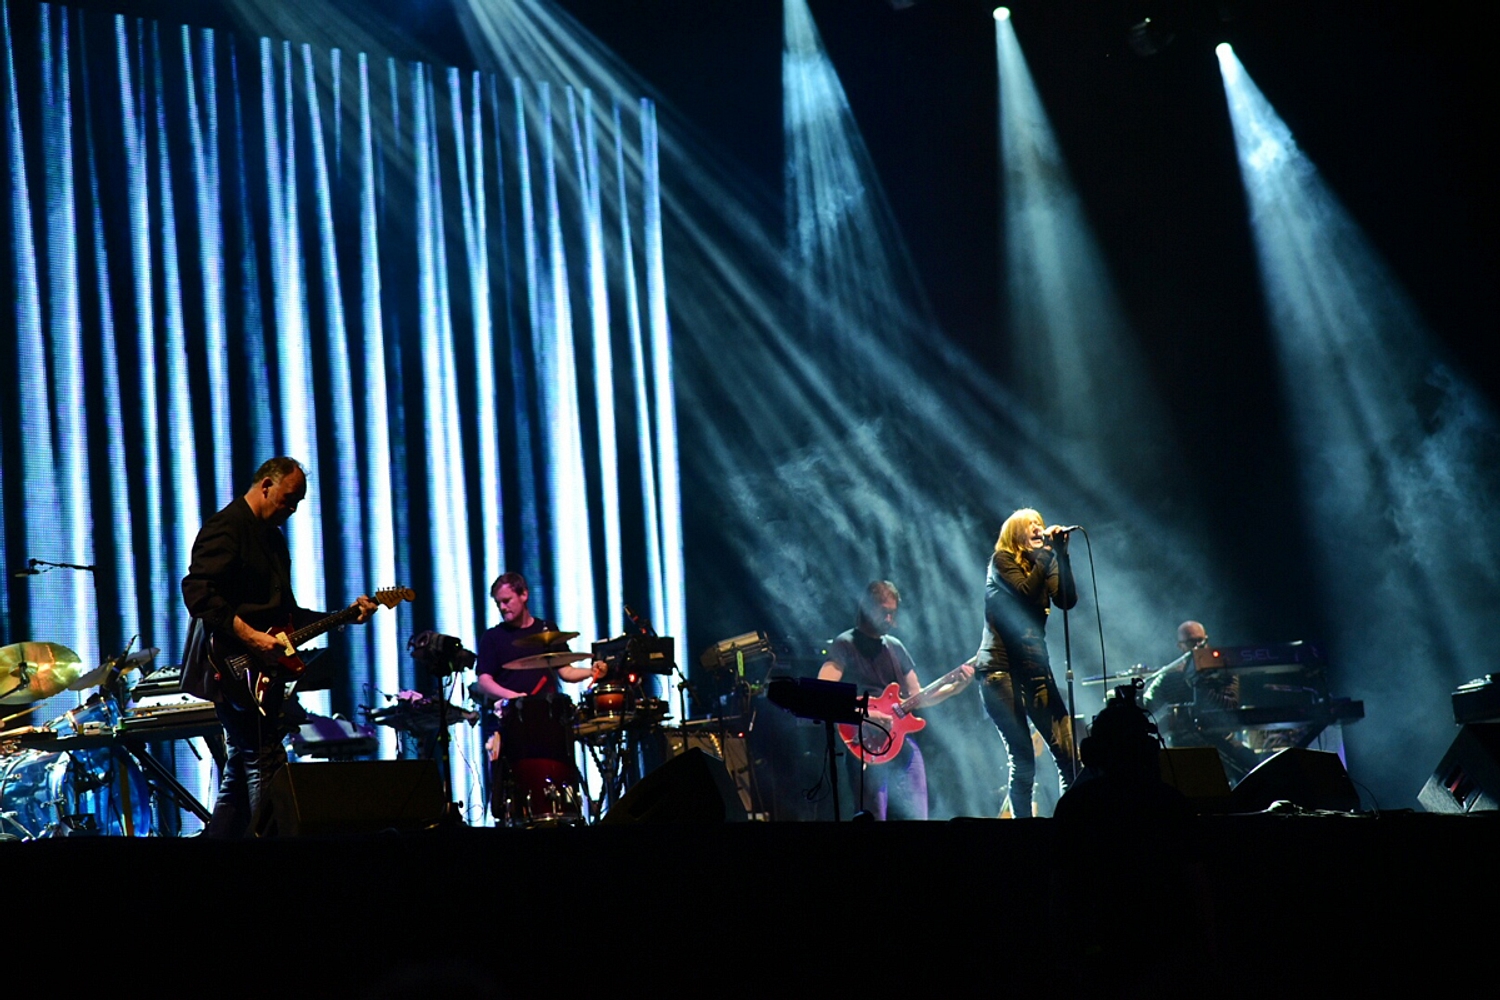 Watch fan shot footage of Portishead and Thom Yorke teaming up at Latitude 2015